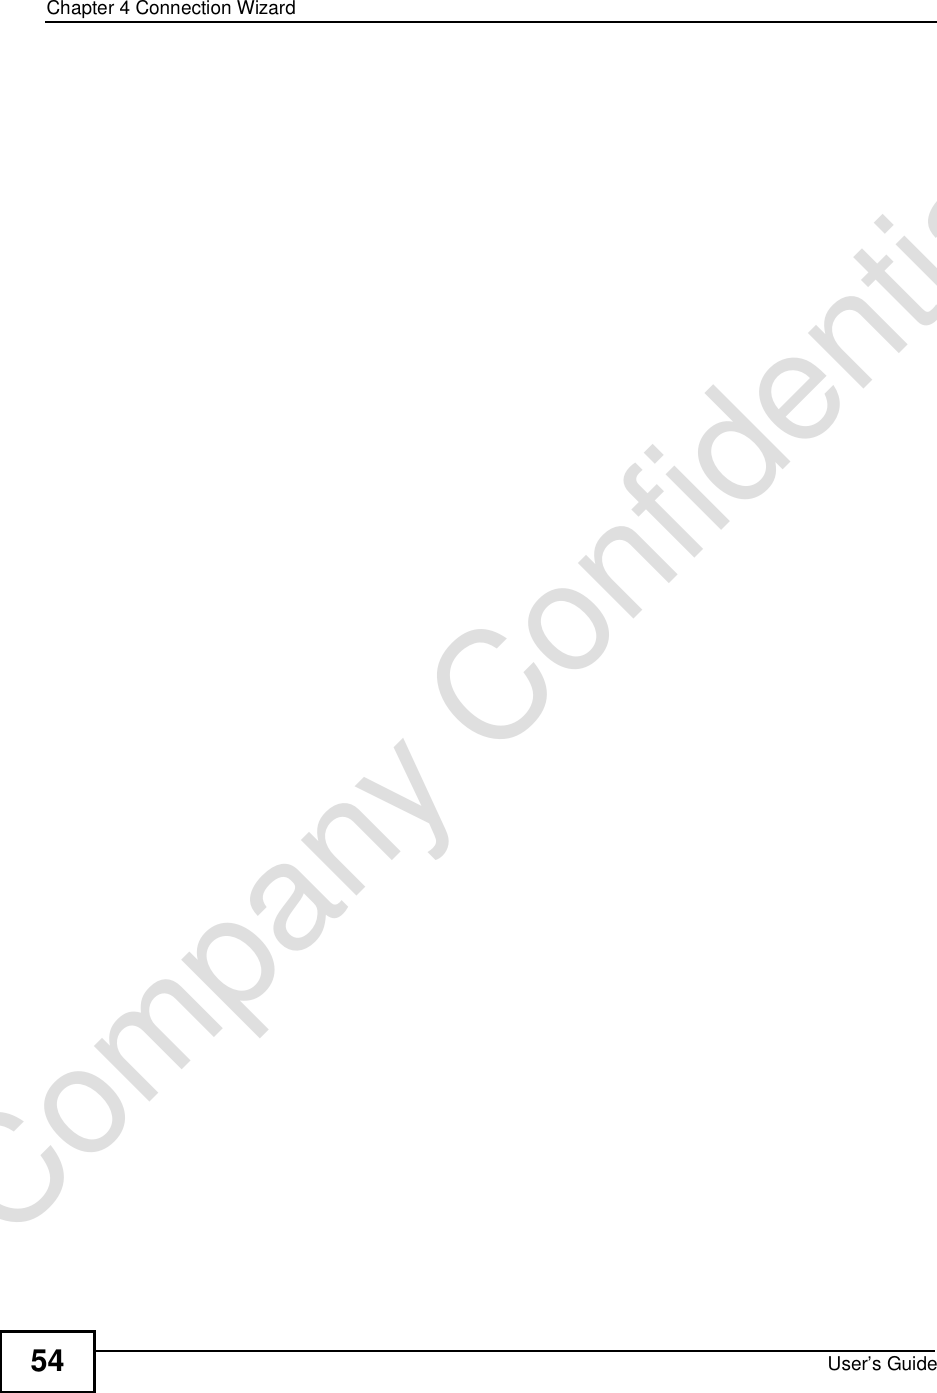 Chapter 4Connection WizardUser’s Guide54Company Confidential